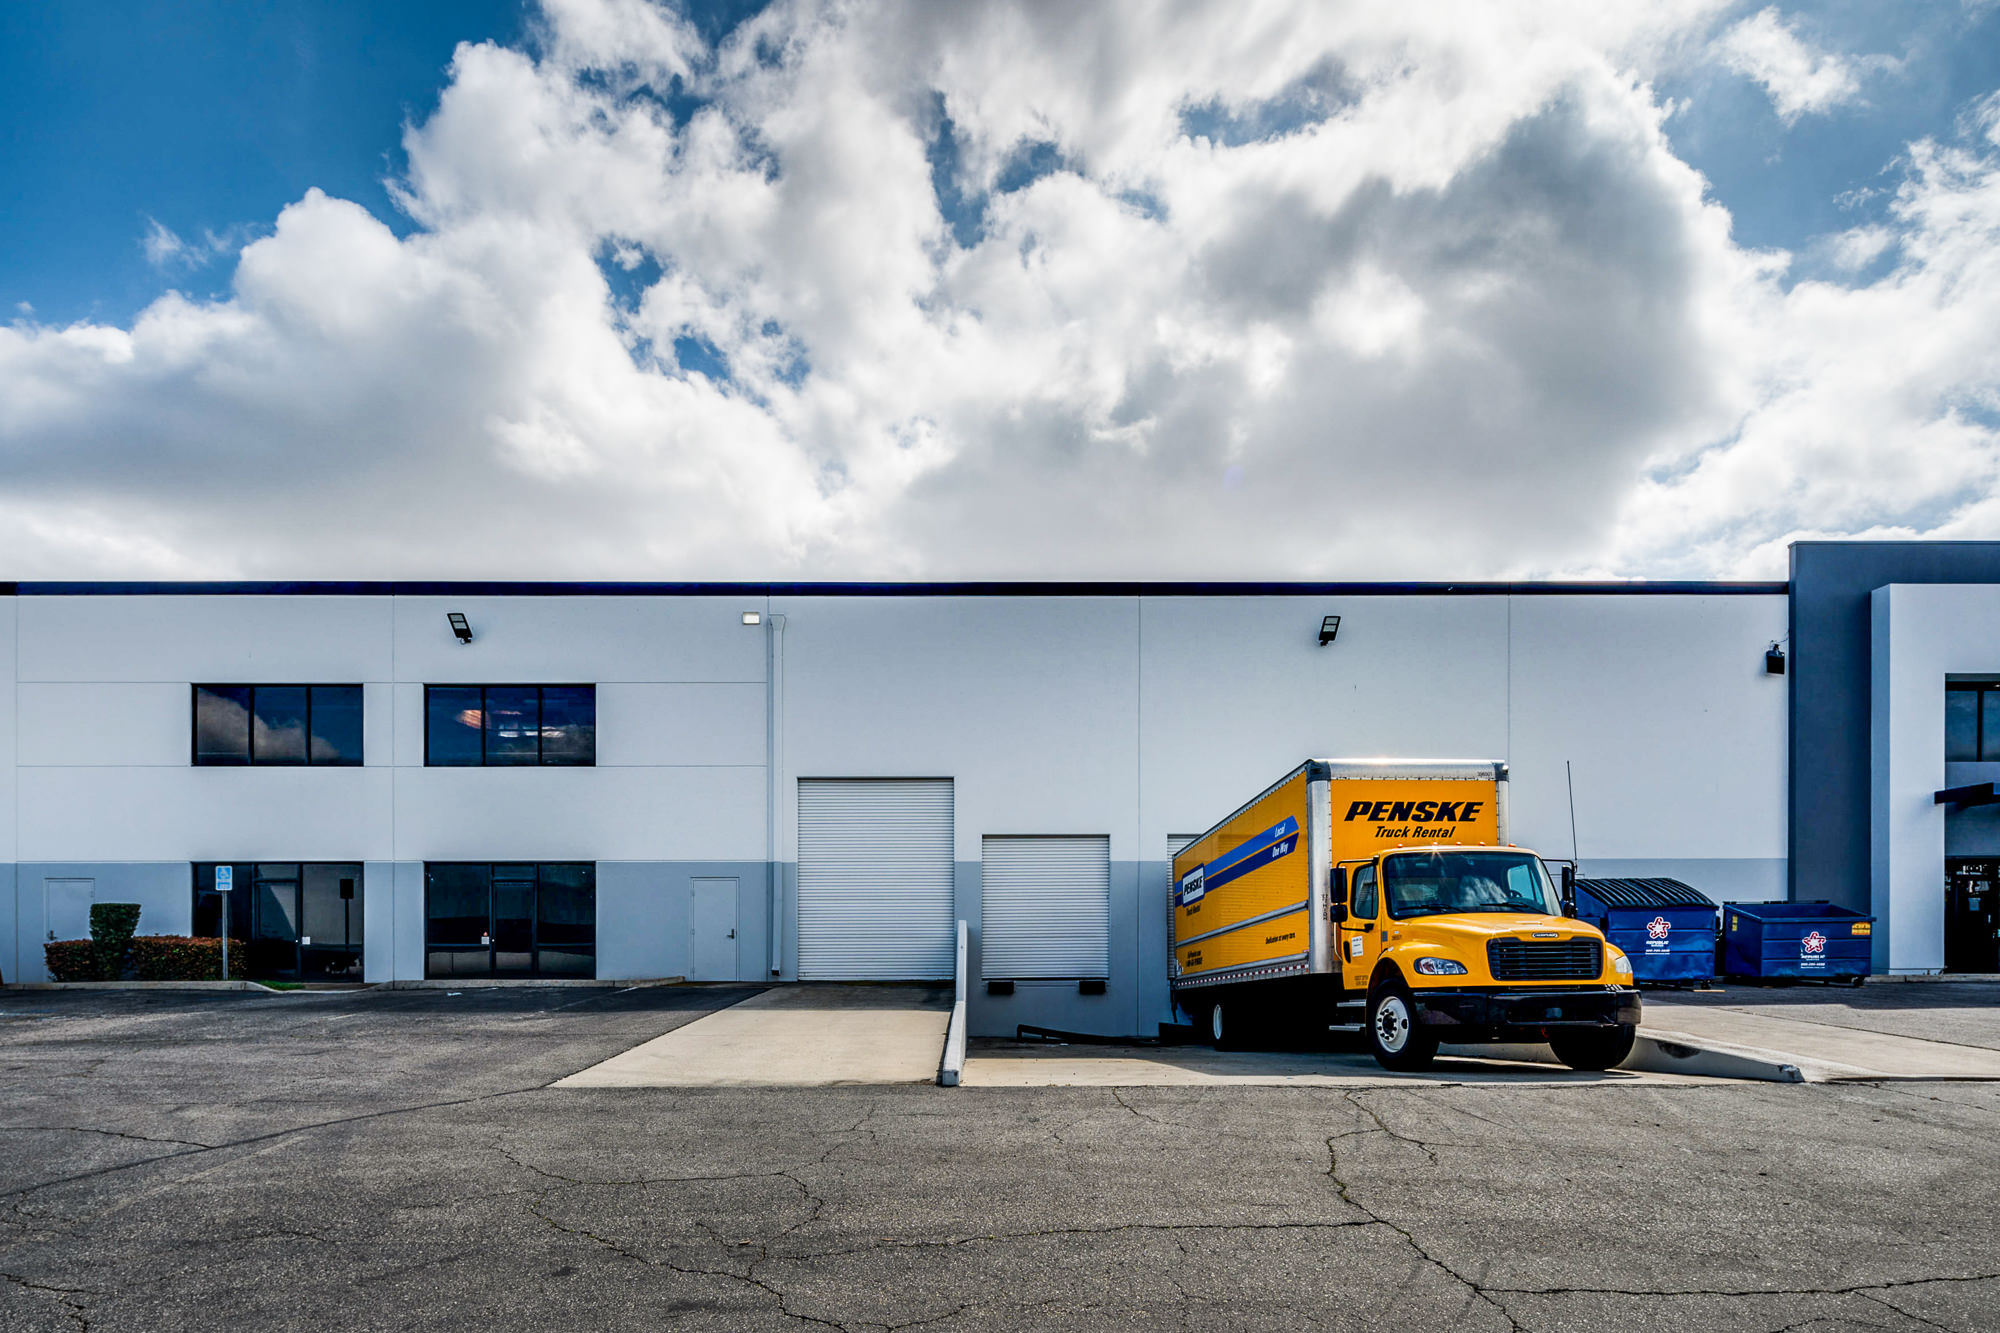 Staley Point Capital and Bain Capital Complete Sale of Two Southern California Industrial Properties for $54 Million